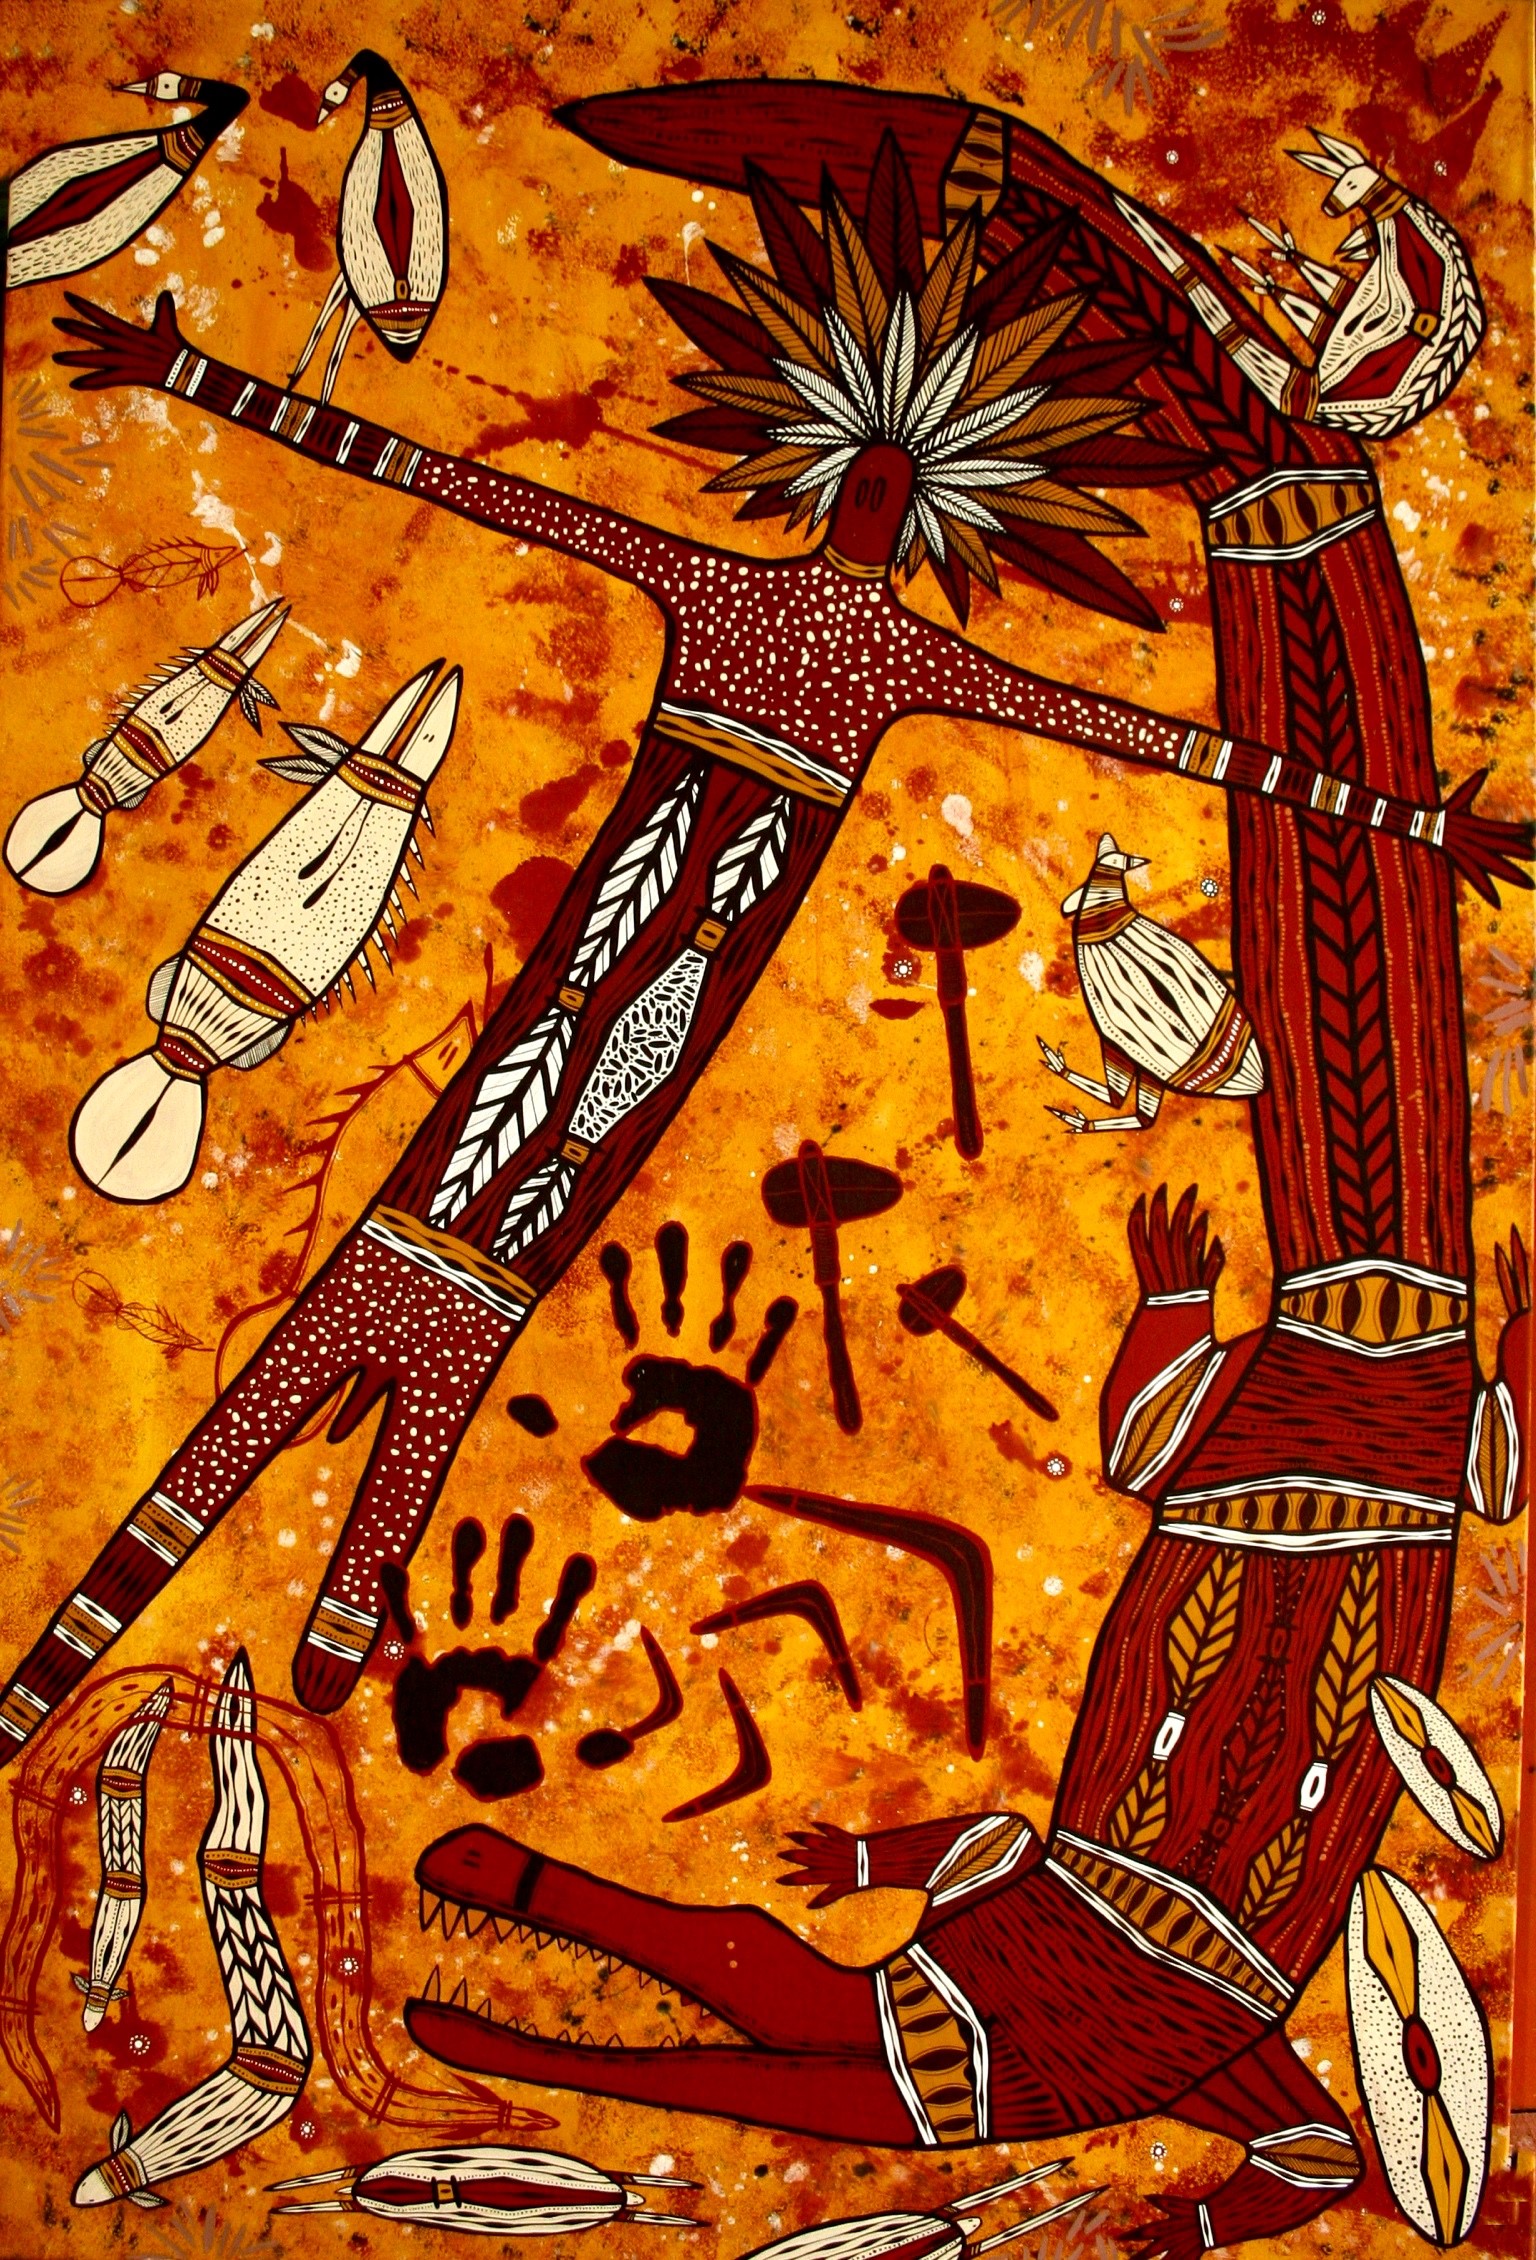 indigenous painting depicting a male figure with headdress and crocodile. Colours are red, black, orange and white. Around the male figure and crocodile the image depicts smaller Australian animals, axes, hand prints and boomerang.